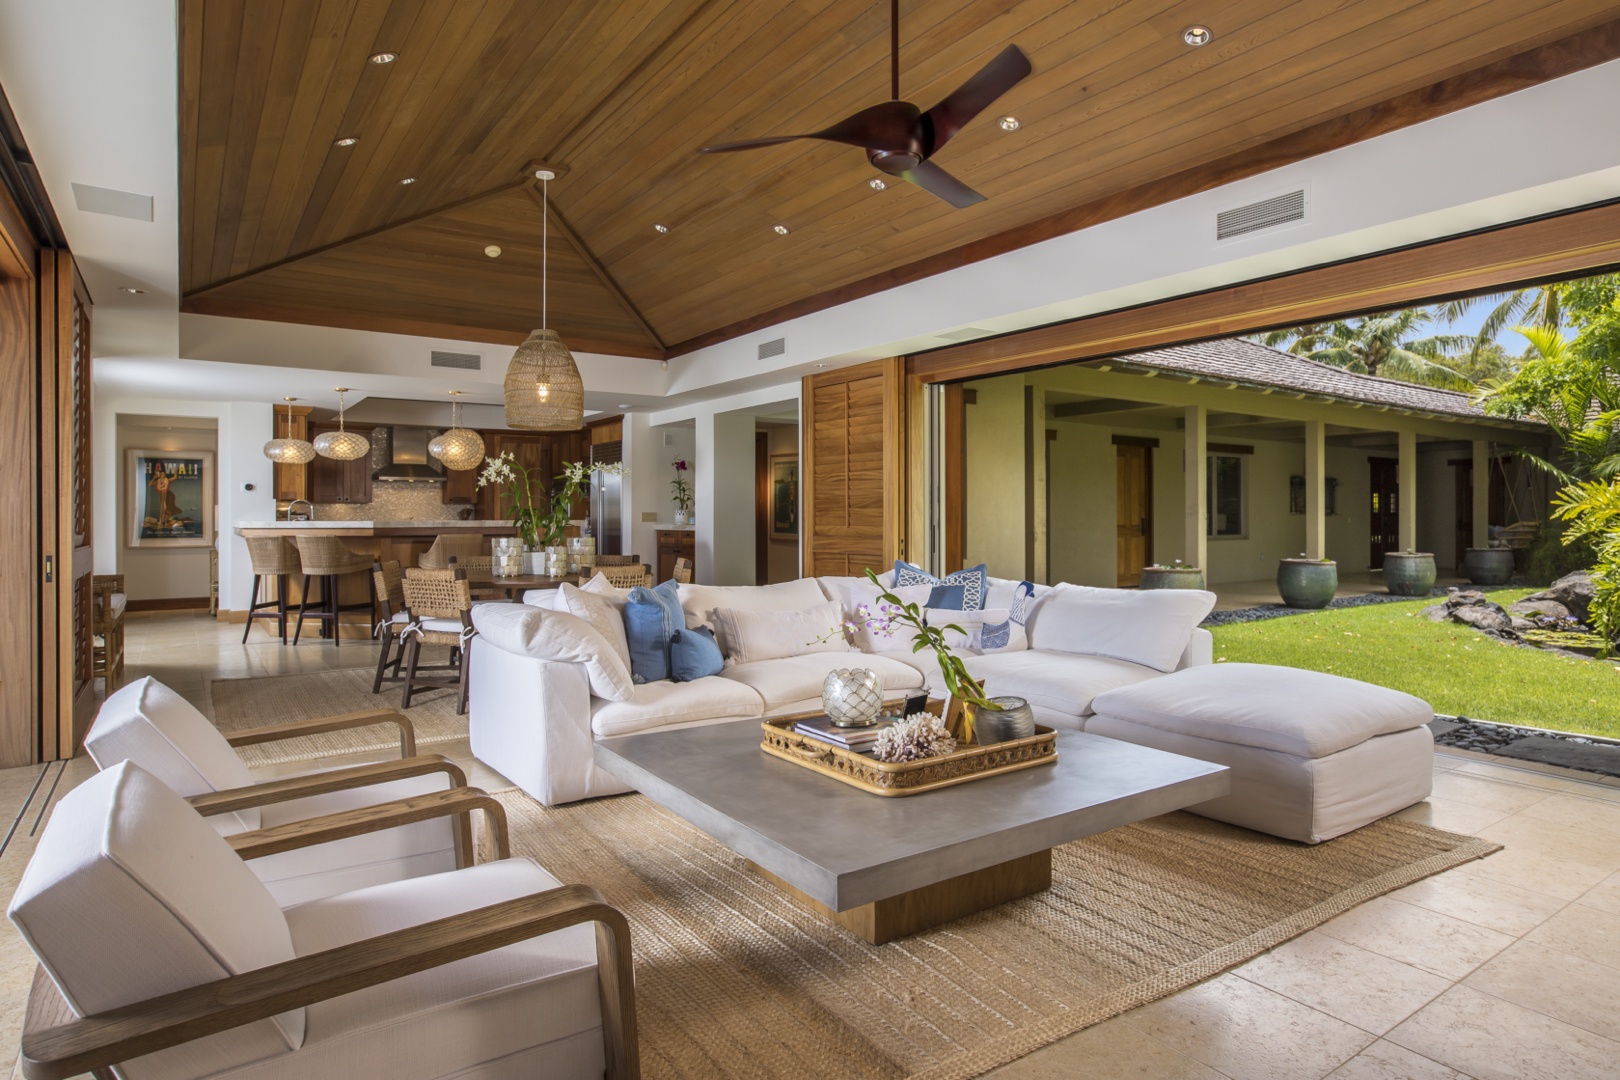 Kailua Kona Vacation Rentals, 4BD Kahikole Street (218) Estate Home at Four Seasons Resort at Hualalai - Side angle of great room featuring soaring vaulted ceilings, plush seating & chic, modern decor